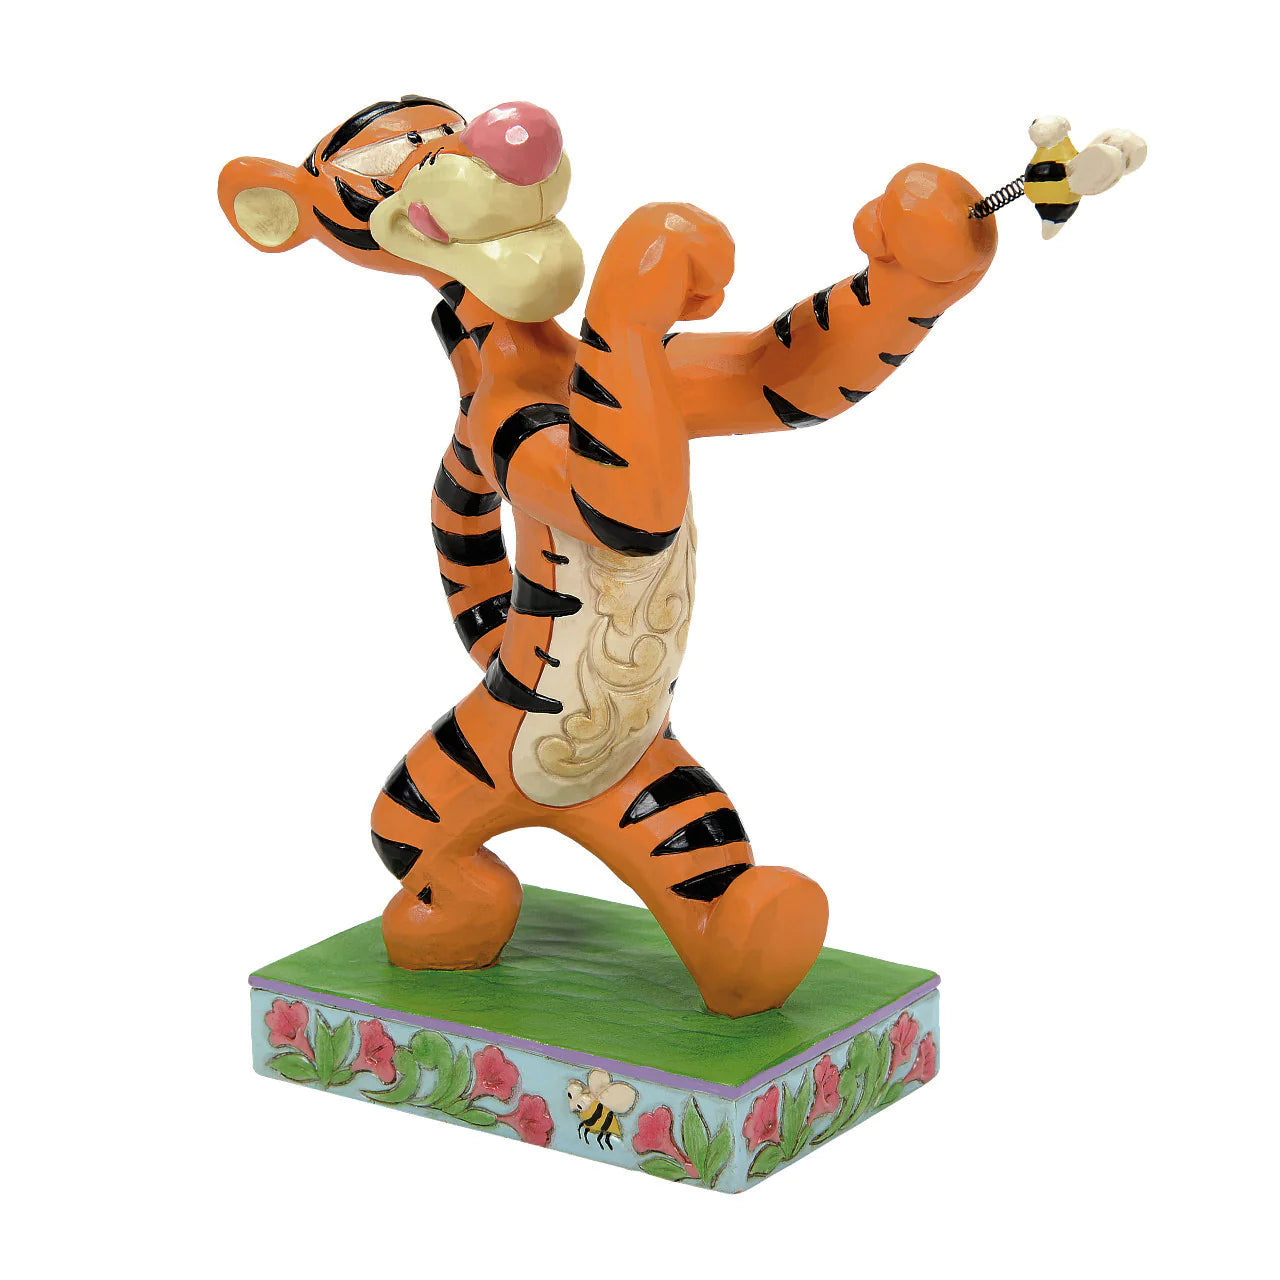 Tigger Whinne the Pooh "Bee Boxing" Disney Tradtions Jime Shore Statue